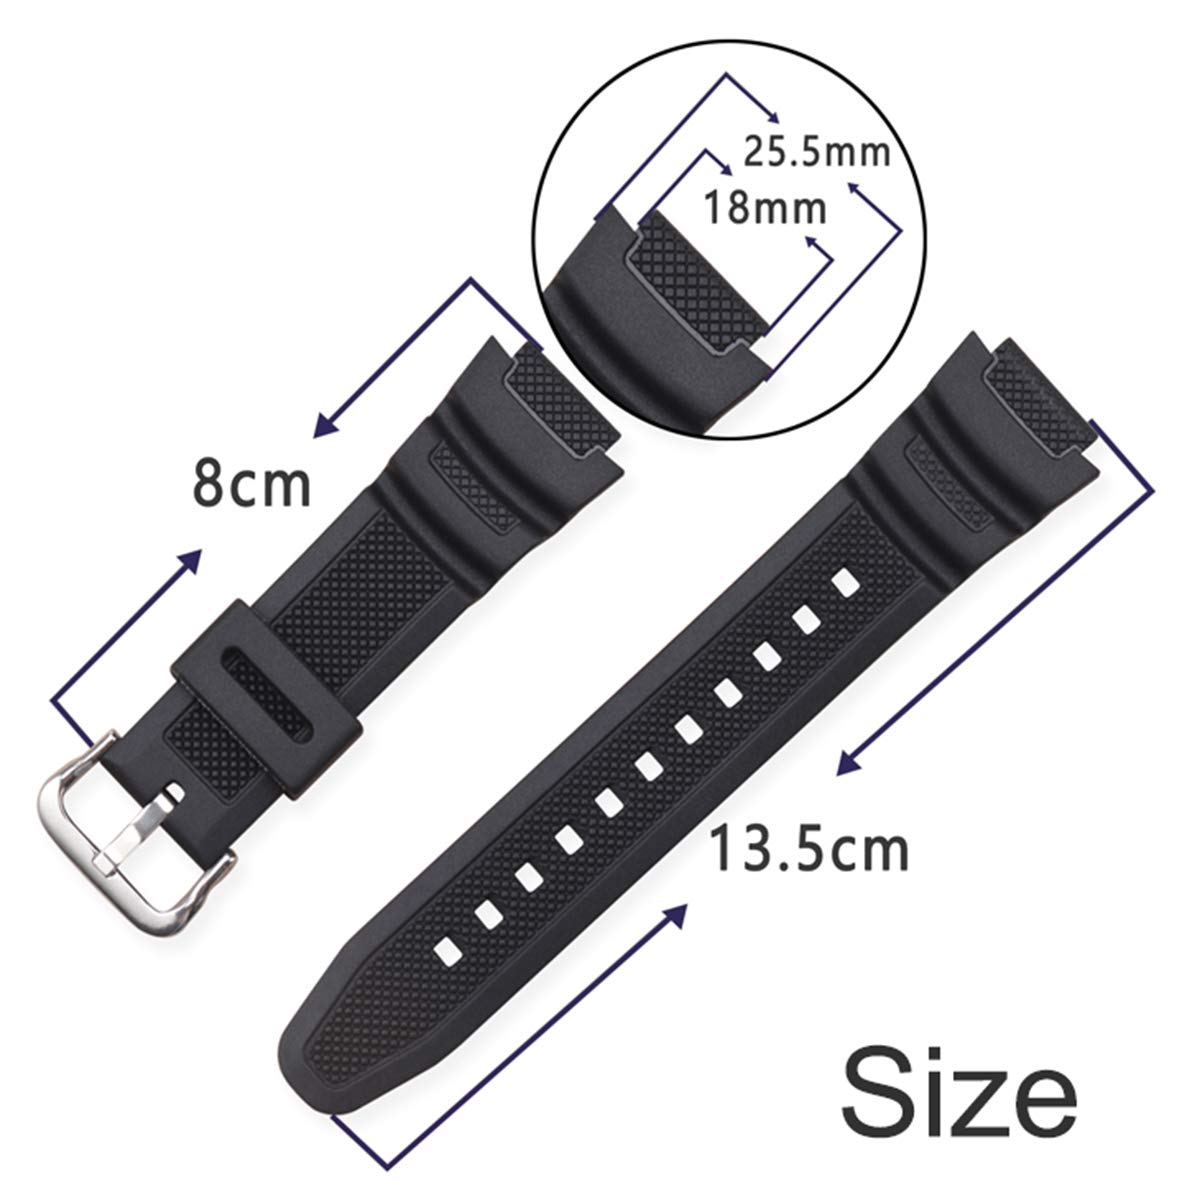 Waterproof Natural Resin Replacement Watch Band for Casio AQ- S800W SGW-300H MRW-200H AE-1200 W-800H W-735H